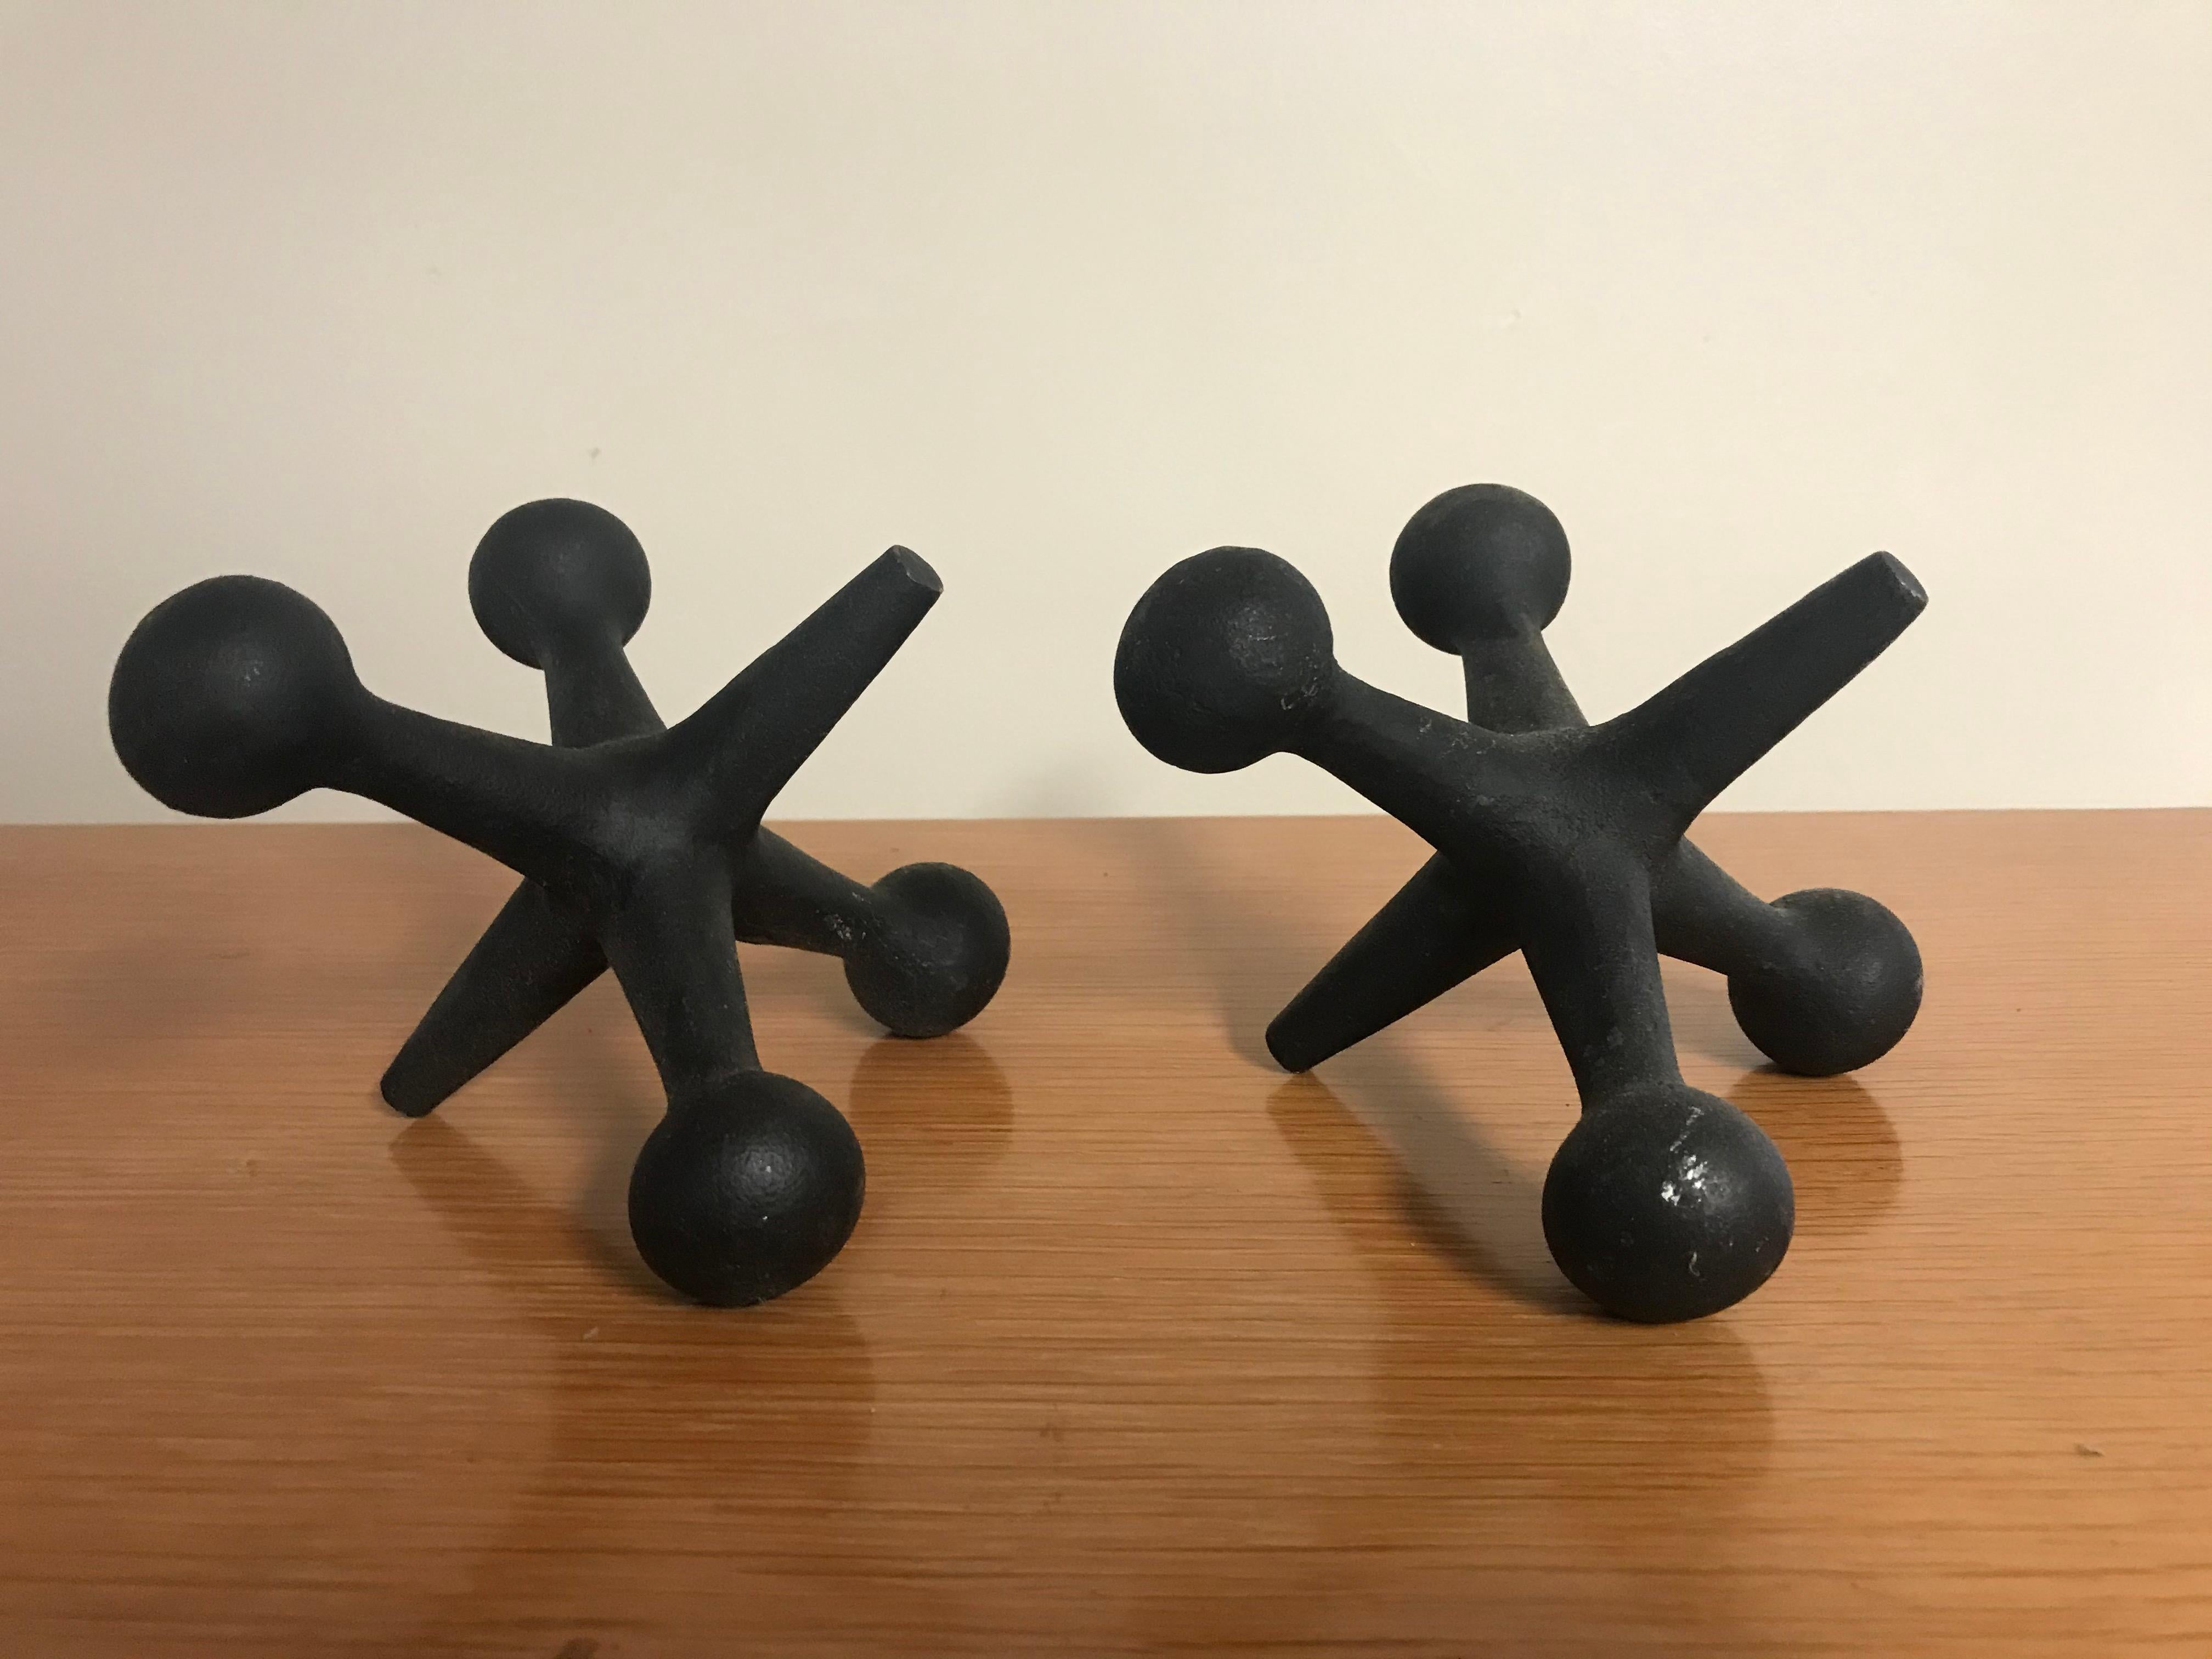 American Pair of Black Iron Pop Art 1960s Jacks Bookends by Bill Curry for Design Line